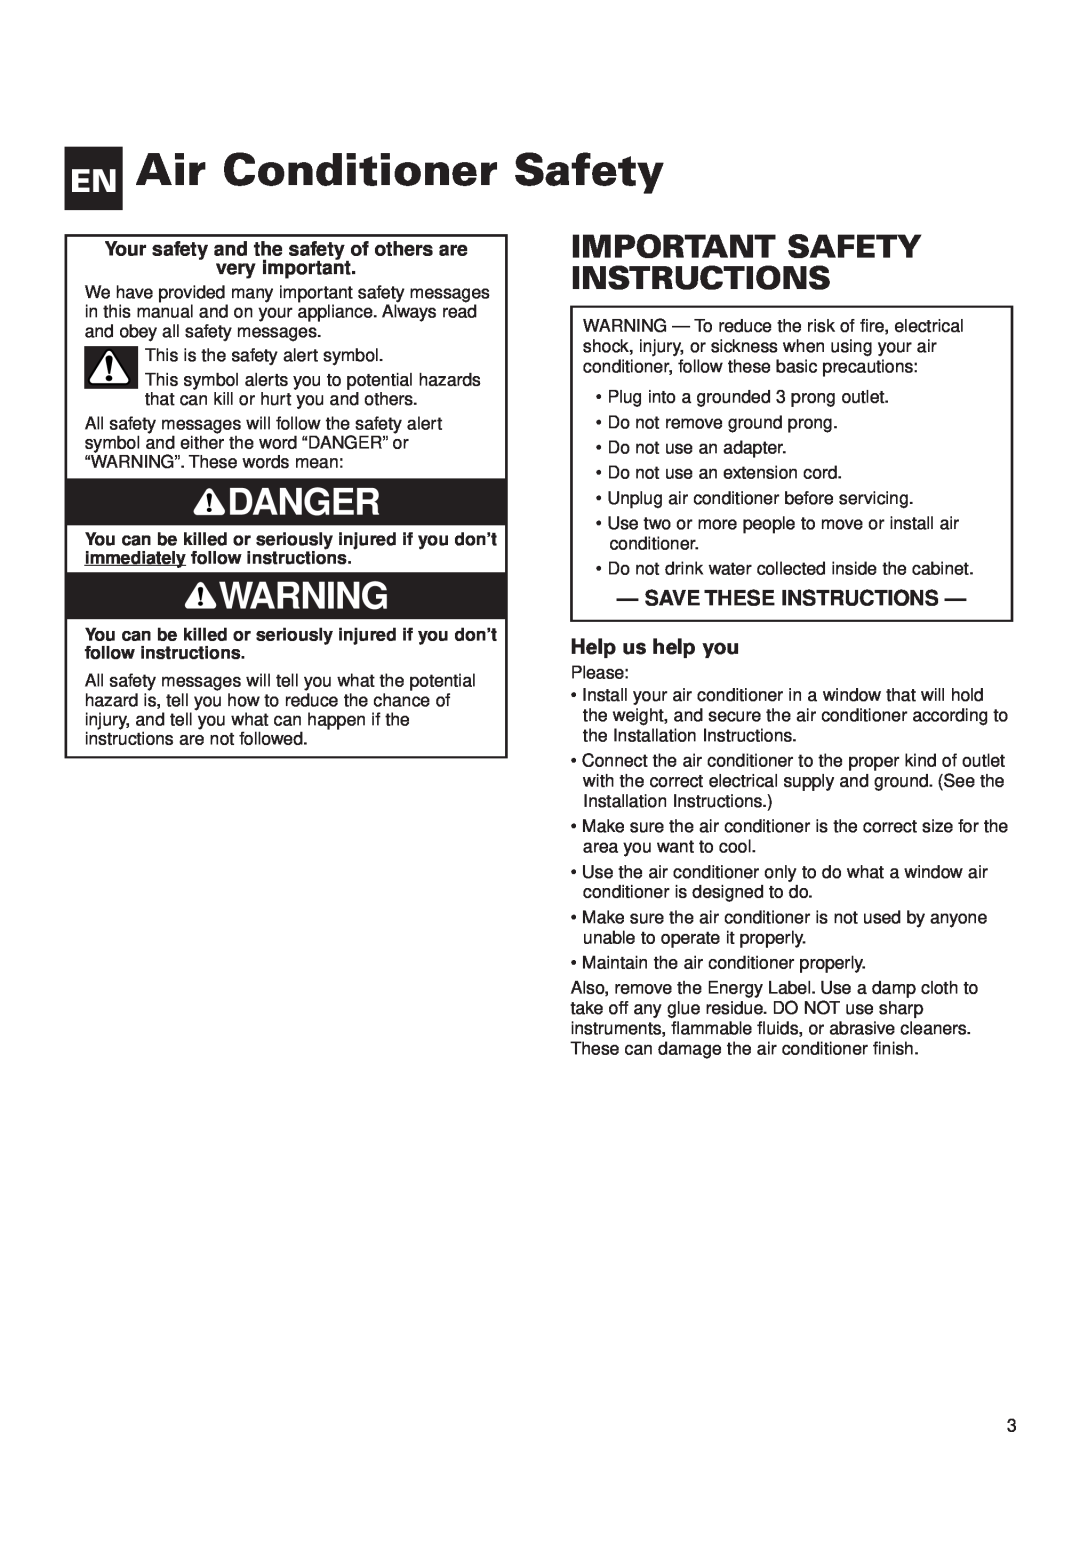 Whirlpool ACQ152XK0 manual EN Air Conditioner Safety, Danger, Important Safety Instructions, Save These Instructions 